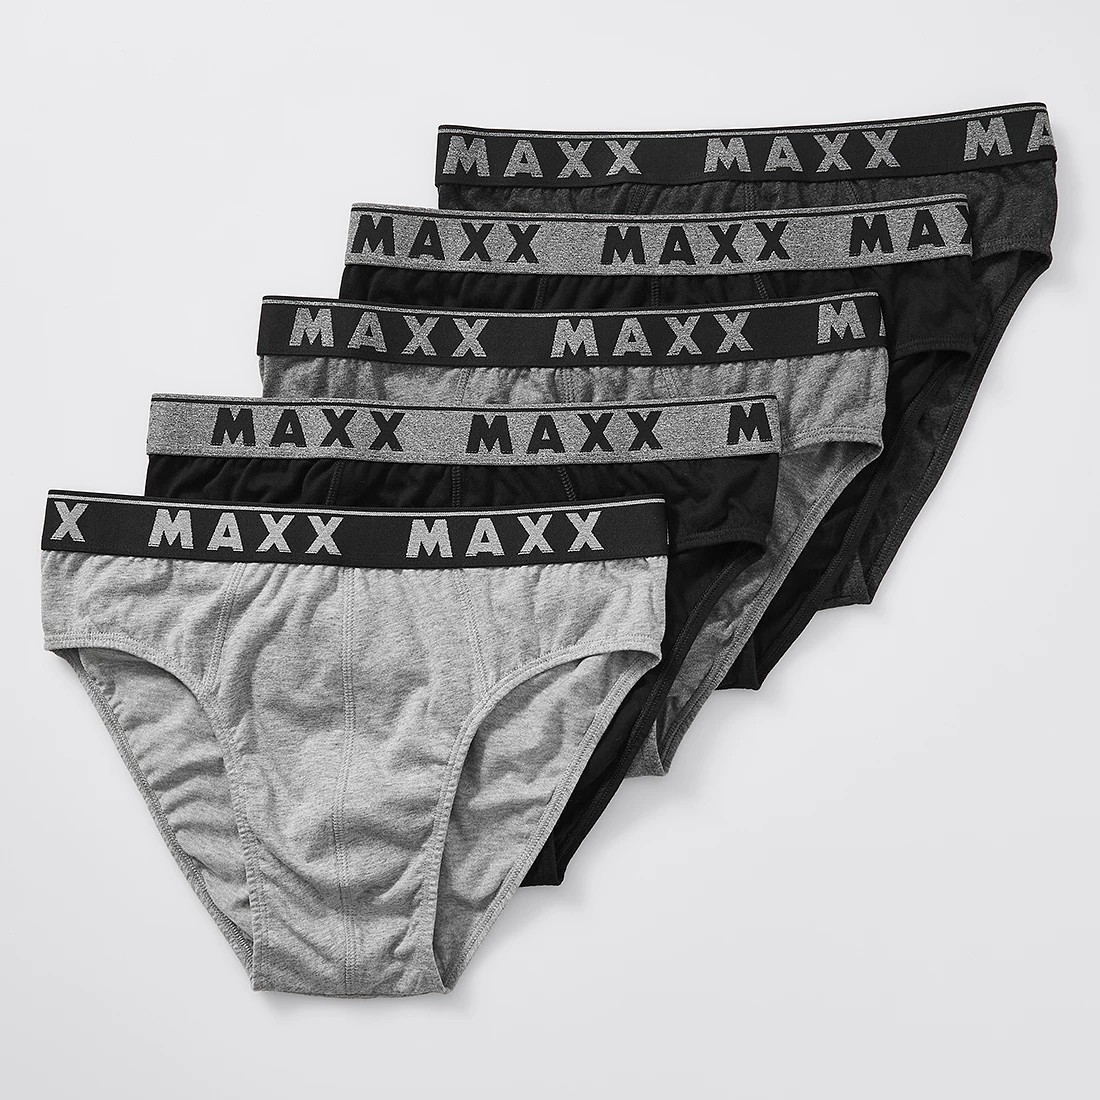 5-pack Hipster Briefs